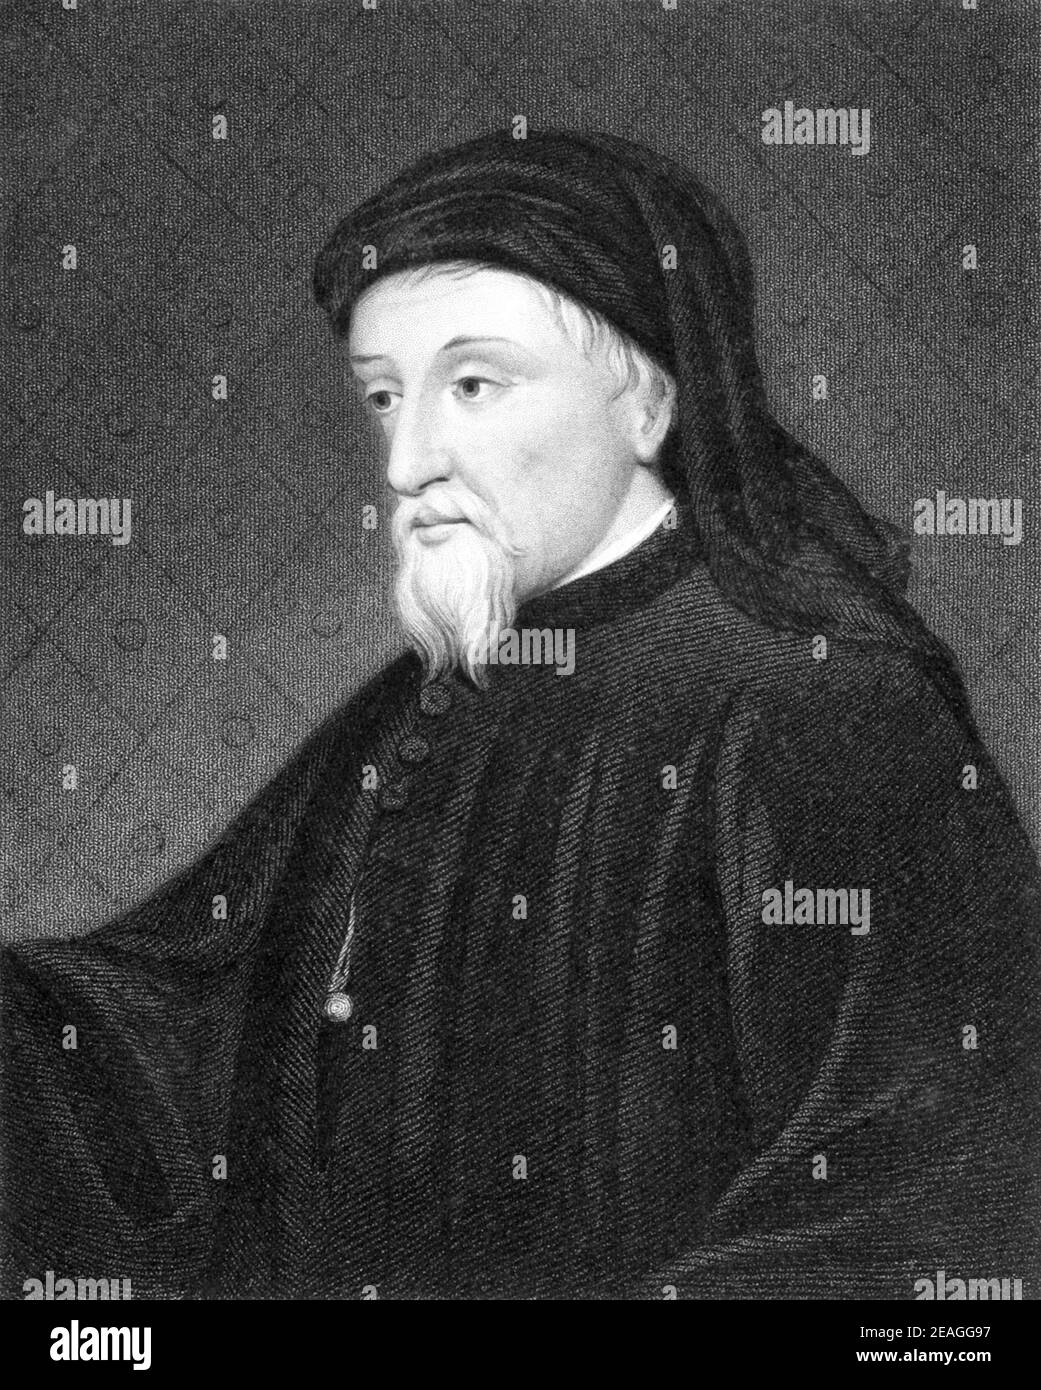 Chaucer, Geoffrey Chaucer (1340s – 1400) English poet and author. Widely considered the greatest English poet of the Middle Ages, best known for The Canterbury Tales. Stock Photo